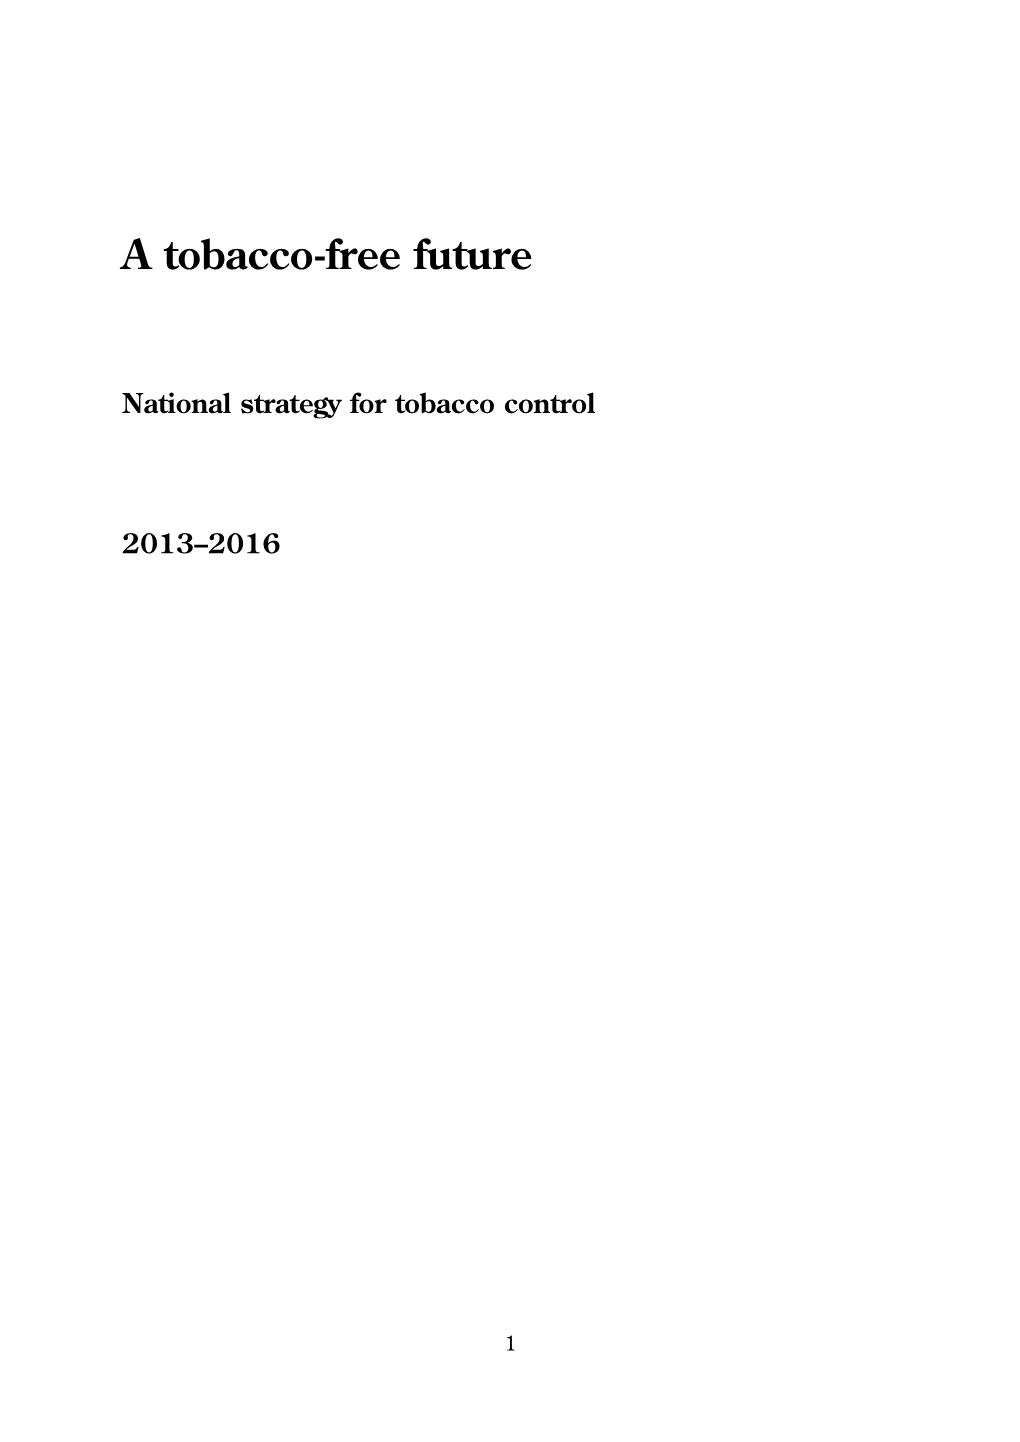 National Tobacco Control Strategy 2013-2016